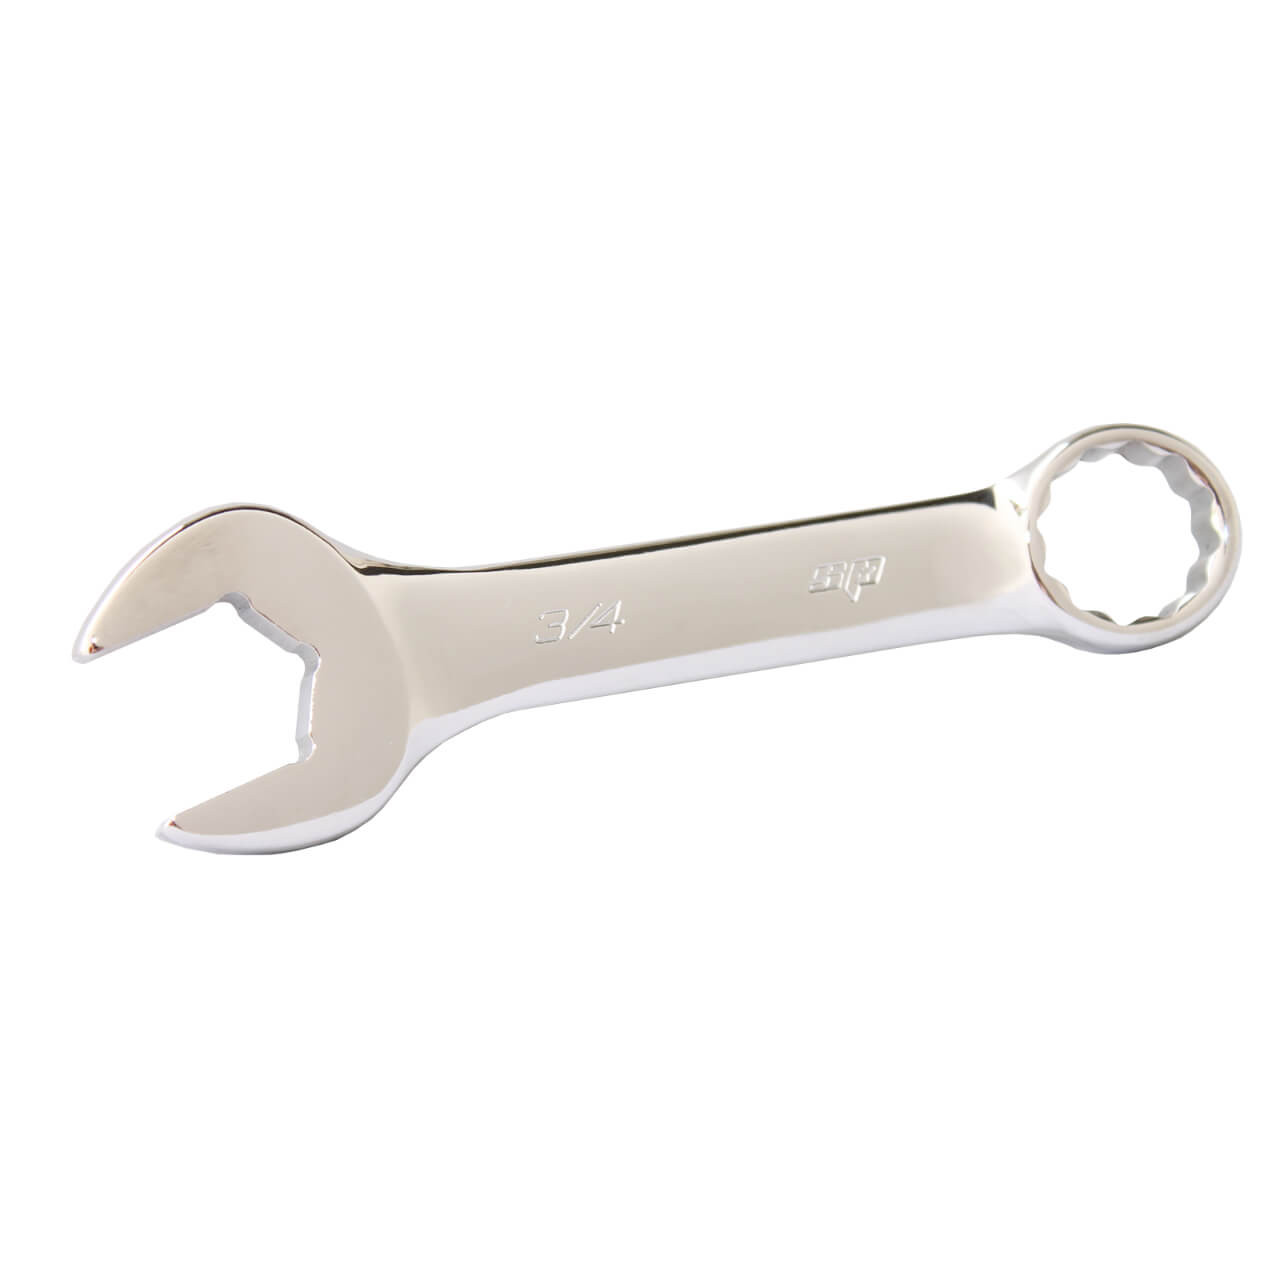 SP Tools 3/8 Stubby Combination ROE Spanner Imperial